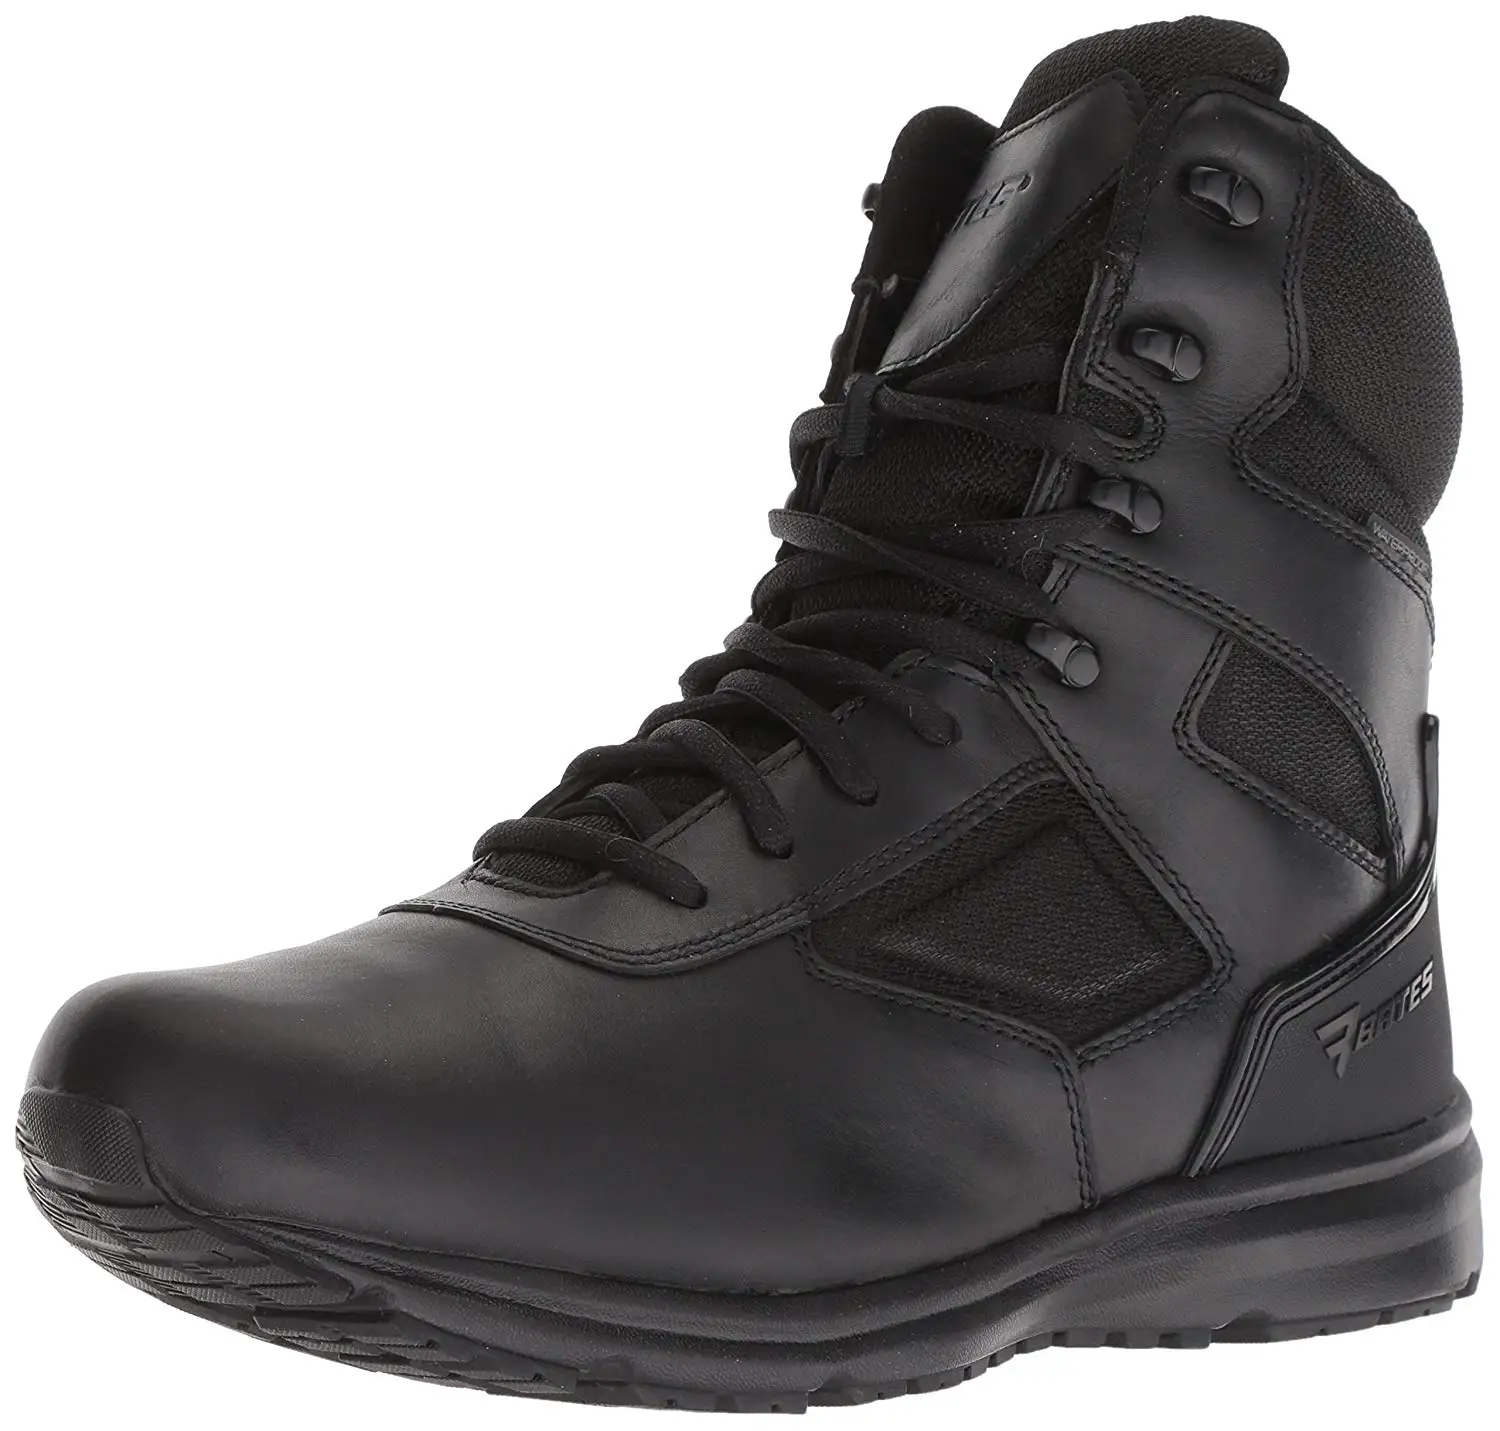 Cheap Bates Tactical Side Zip Boot For 